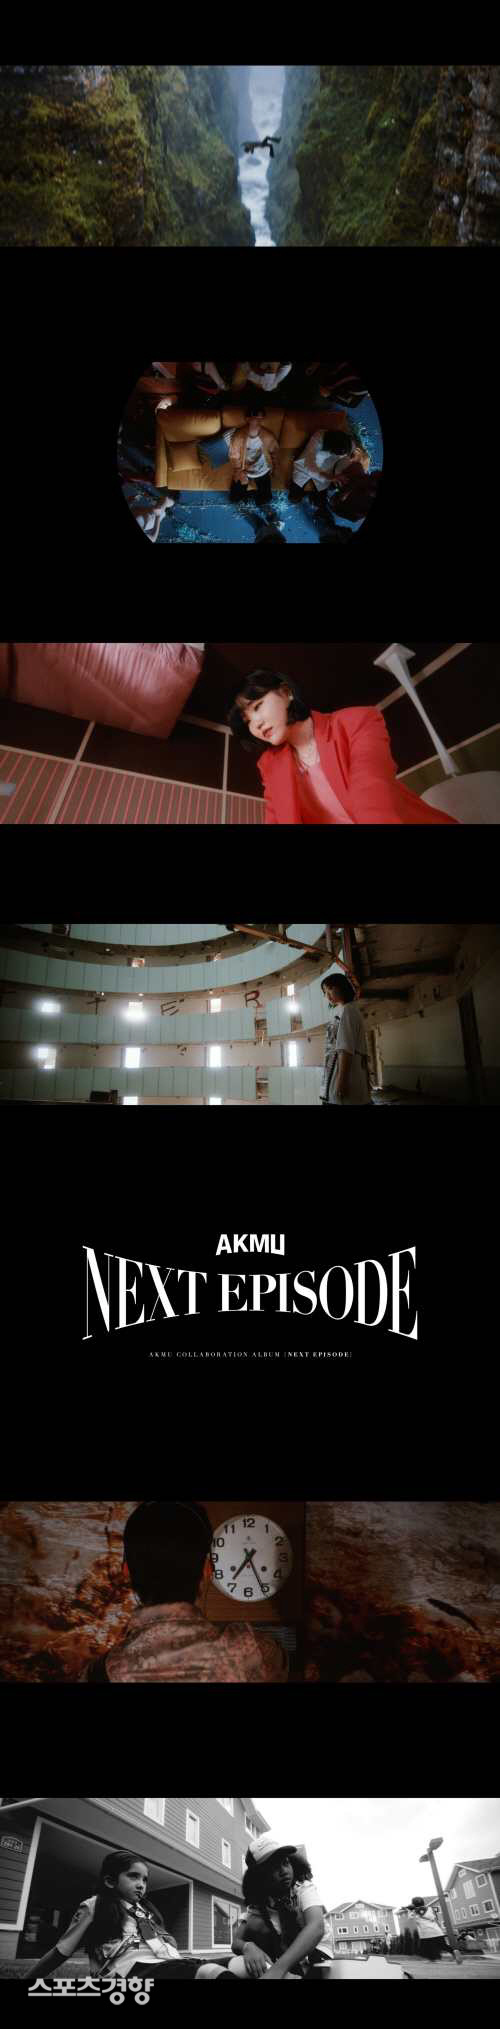 A video Trailer, derived from AKMUs unique Worldview, was released; a minute-long Trailer video captured Sight with an overwhelming scale.YG Entertainment posted AKMUs new album NEXT EPISODE official video Trailer (OFFICIAL VIDEO TRAILER) on its official blog on the 16th.In the public footage, surreal scenes reminiscent of fantasy movies such as Lee Chan-hyuk, who constantly falls, Claudia Kim in the upside-down room, and children in the black and white world quickly turned into curiosity.AKMU went one step further from the existing way of showing only the title song music video.All seven songs on the album were produced in each video, and the video narrative is organic with an omnibus-style composition, YG explained.YG said, We decided to show official videos of all songs as it is AKMUs first collaboration album. We plan to release it sequentially in the future.The transformation of AKMU has also been a concern: unlike the previous version of the song, which has provided healing to listeners with lyrical melodies, the two in the official video have spewed a chic aura.The netizens who watched the video responded that the power of capital is great, it is the player who makes people expect, AKMU believes and listens.Meanwhile, AKMUs album boasts a super-luxury feature lineup with IU, Lee Sun-hee, Gianti, Binzino, Jannabi Choi Jung-hoon, Crush and Sam Kim.The albums title song Falling, Warfield, BENCH, Ticktock Ticktock, Right, Stupid love song, and EVEREST sound sources will be released on the 26th.